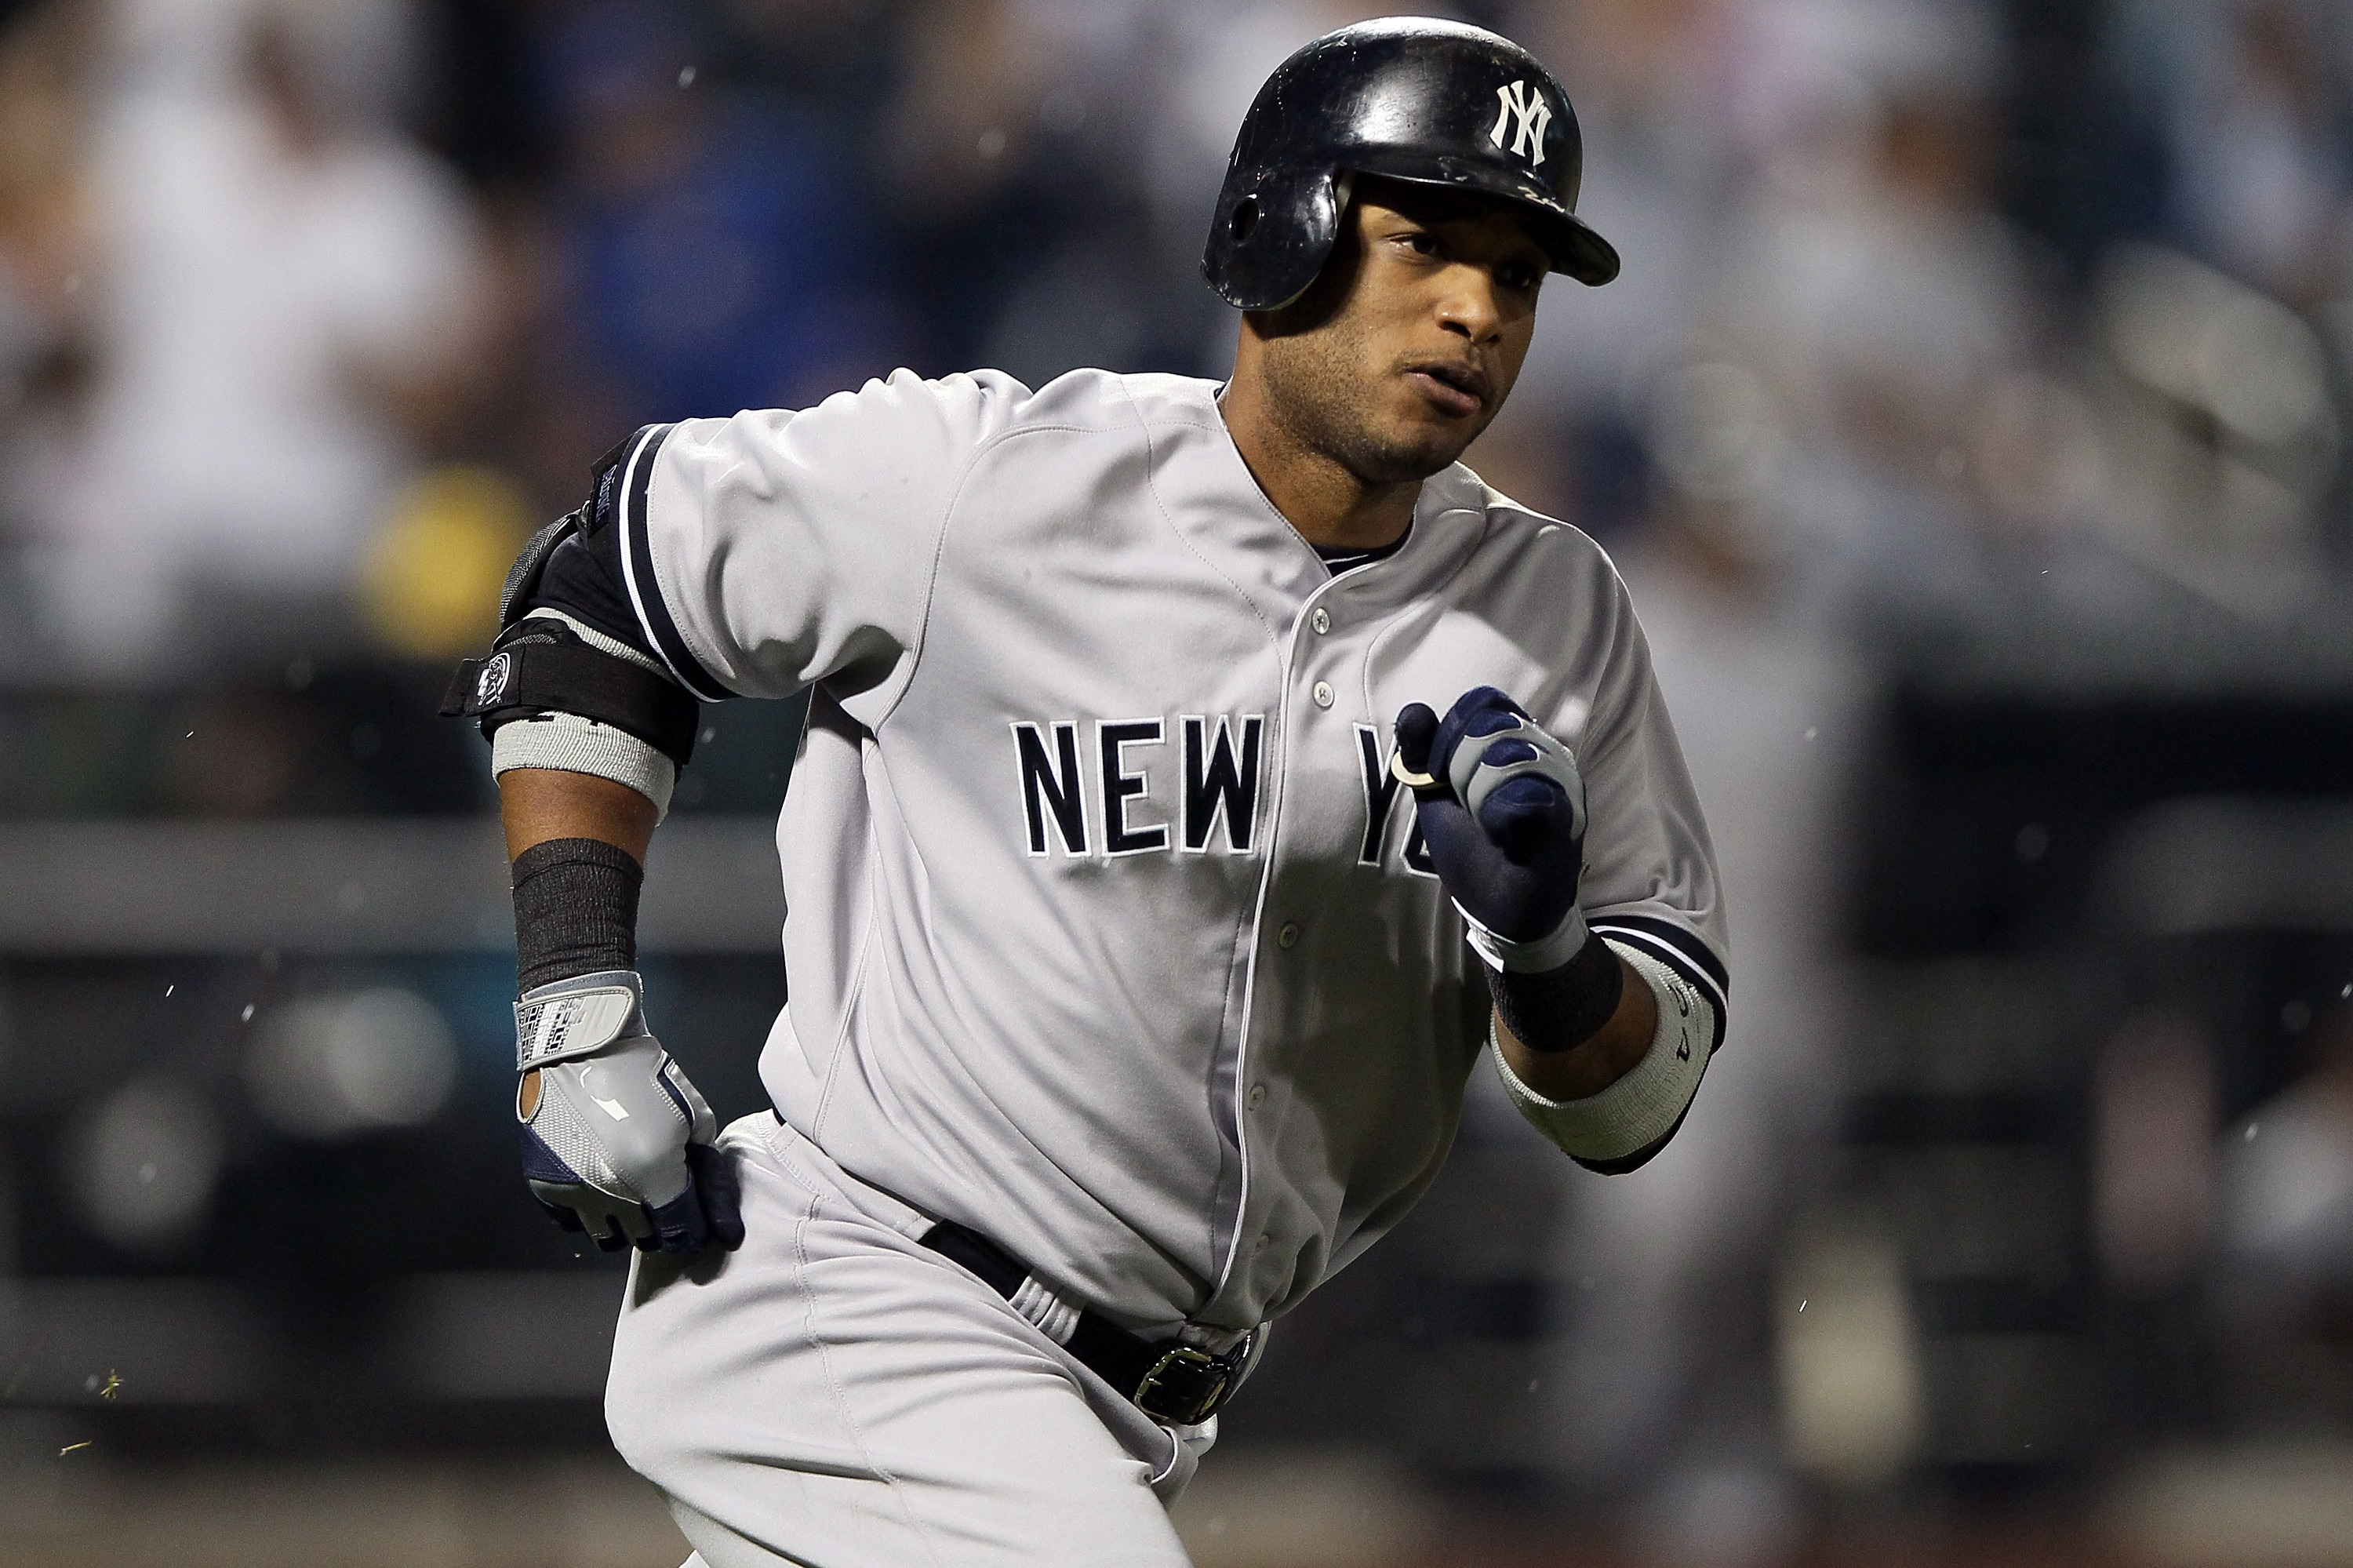 Fantasy Baseball: Robinson Cano and the Top Players for Each AL